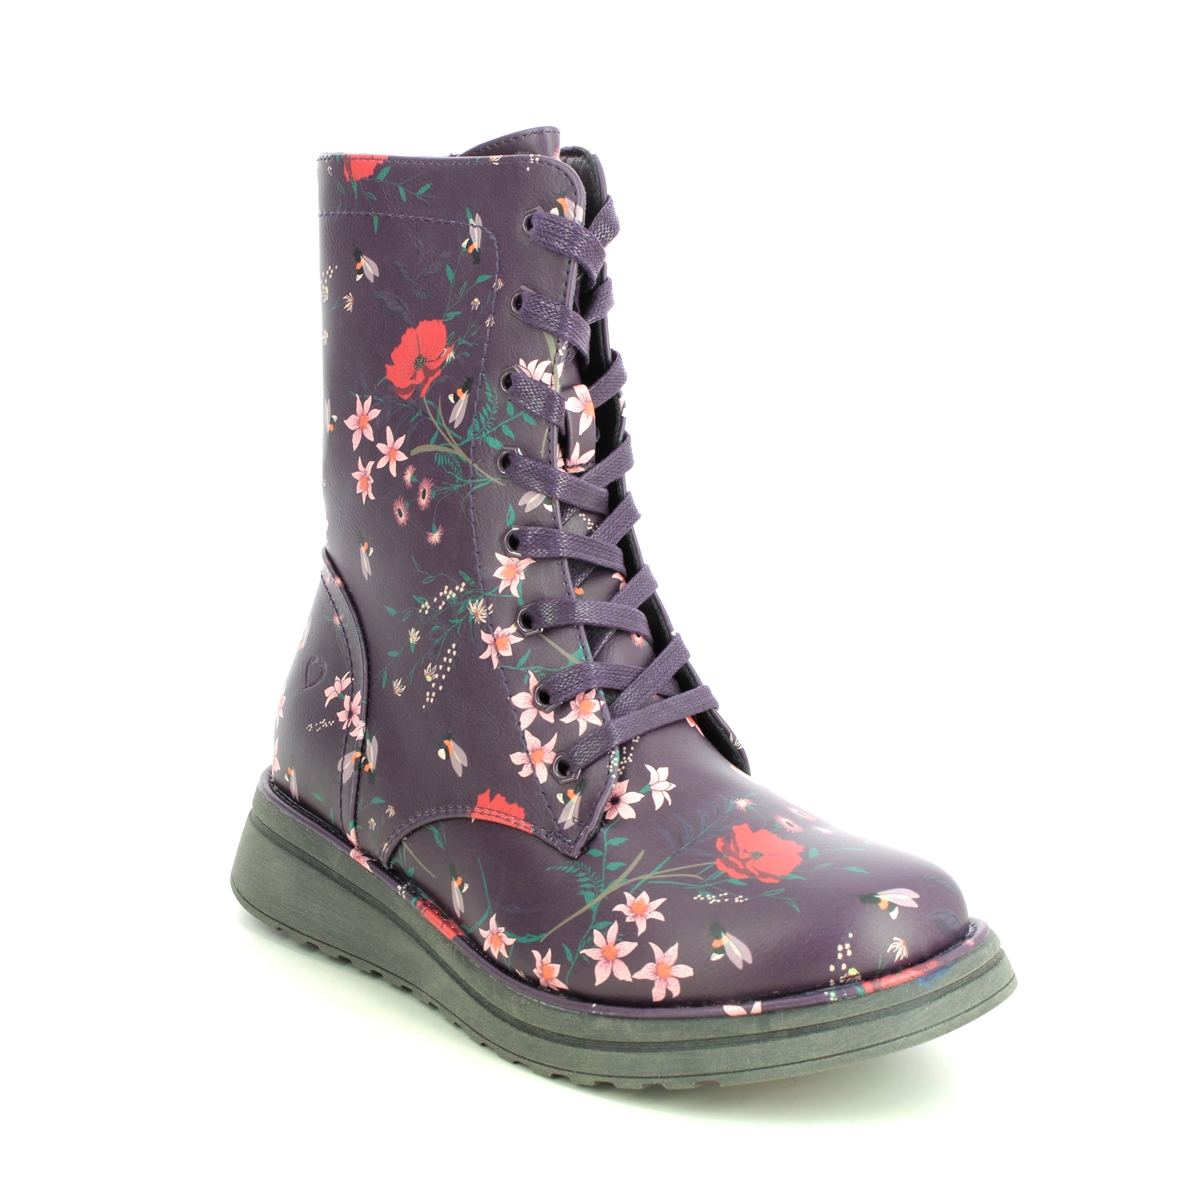 Heavenly Feet Martina Walker Purple Floral Womens Lace Up Boots 3510-96 in a Plain Man-made in Size 7